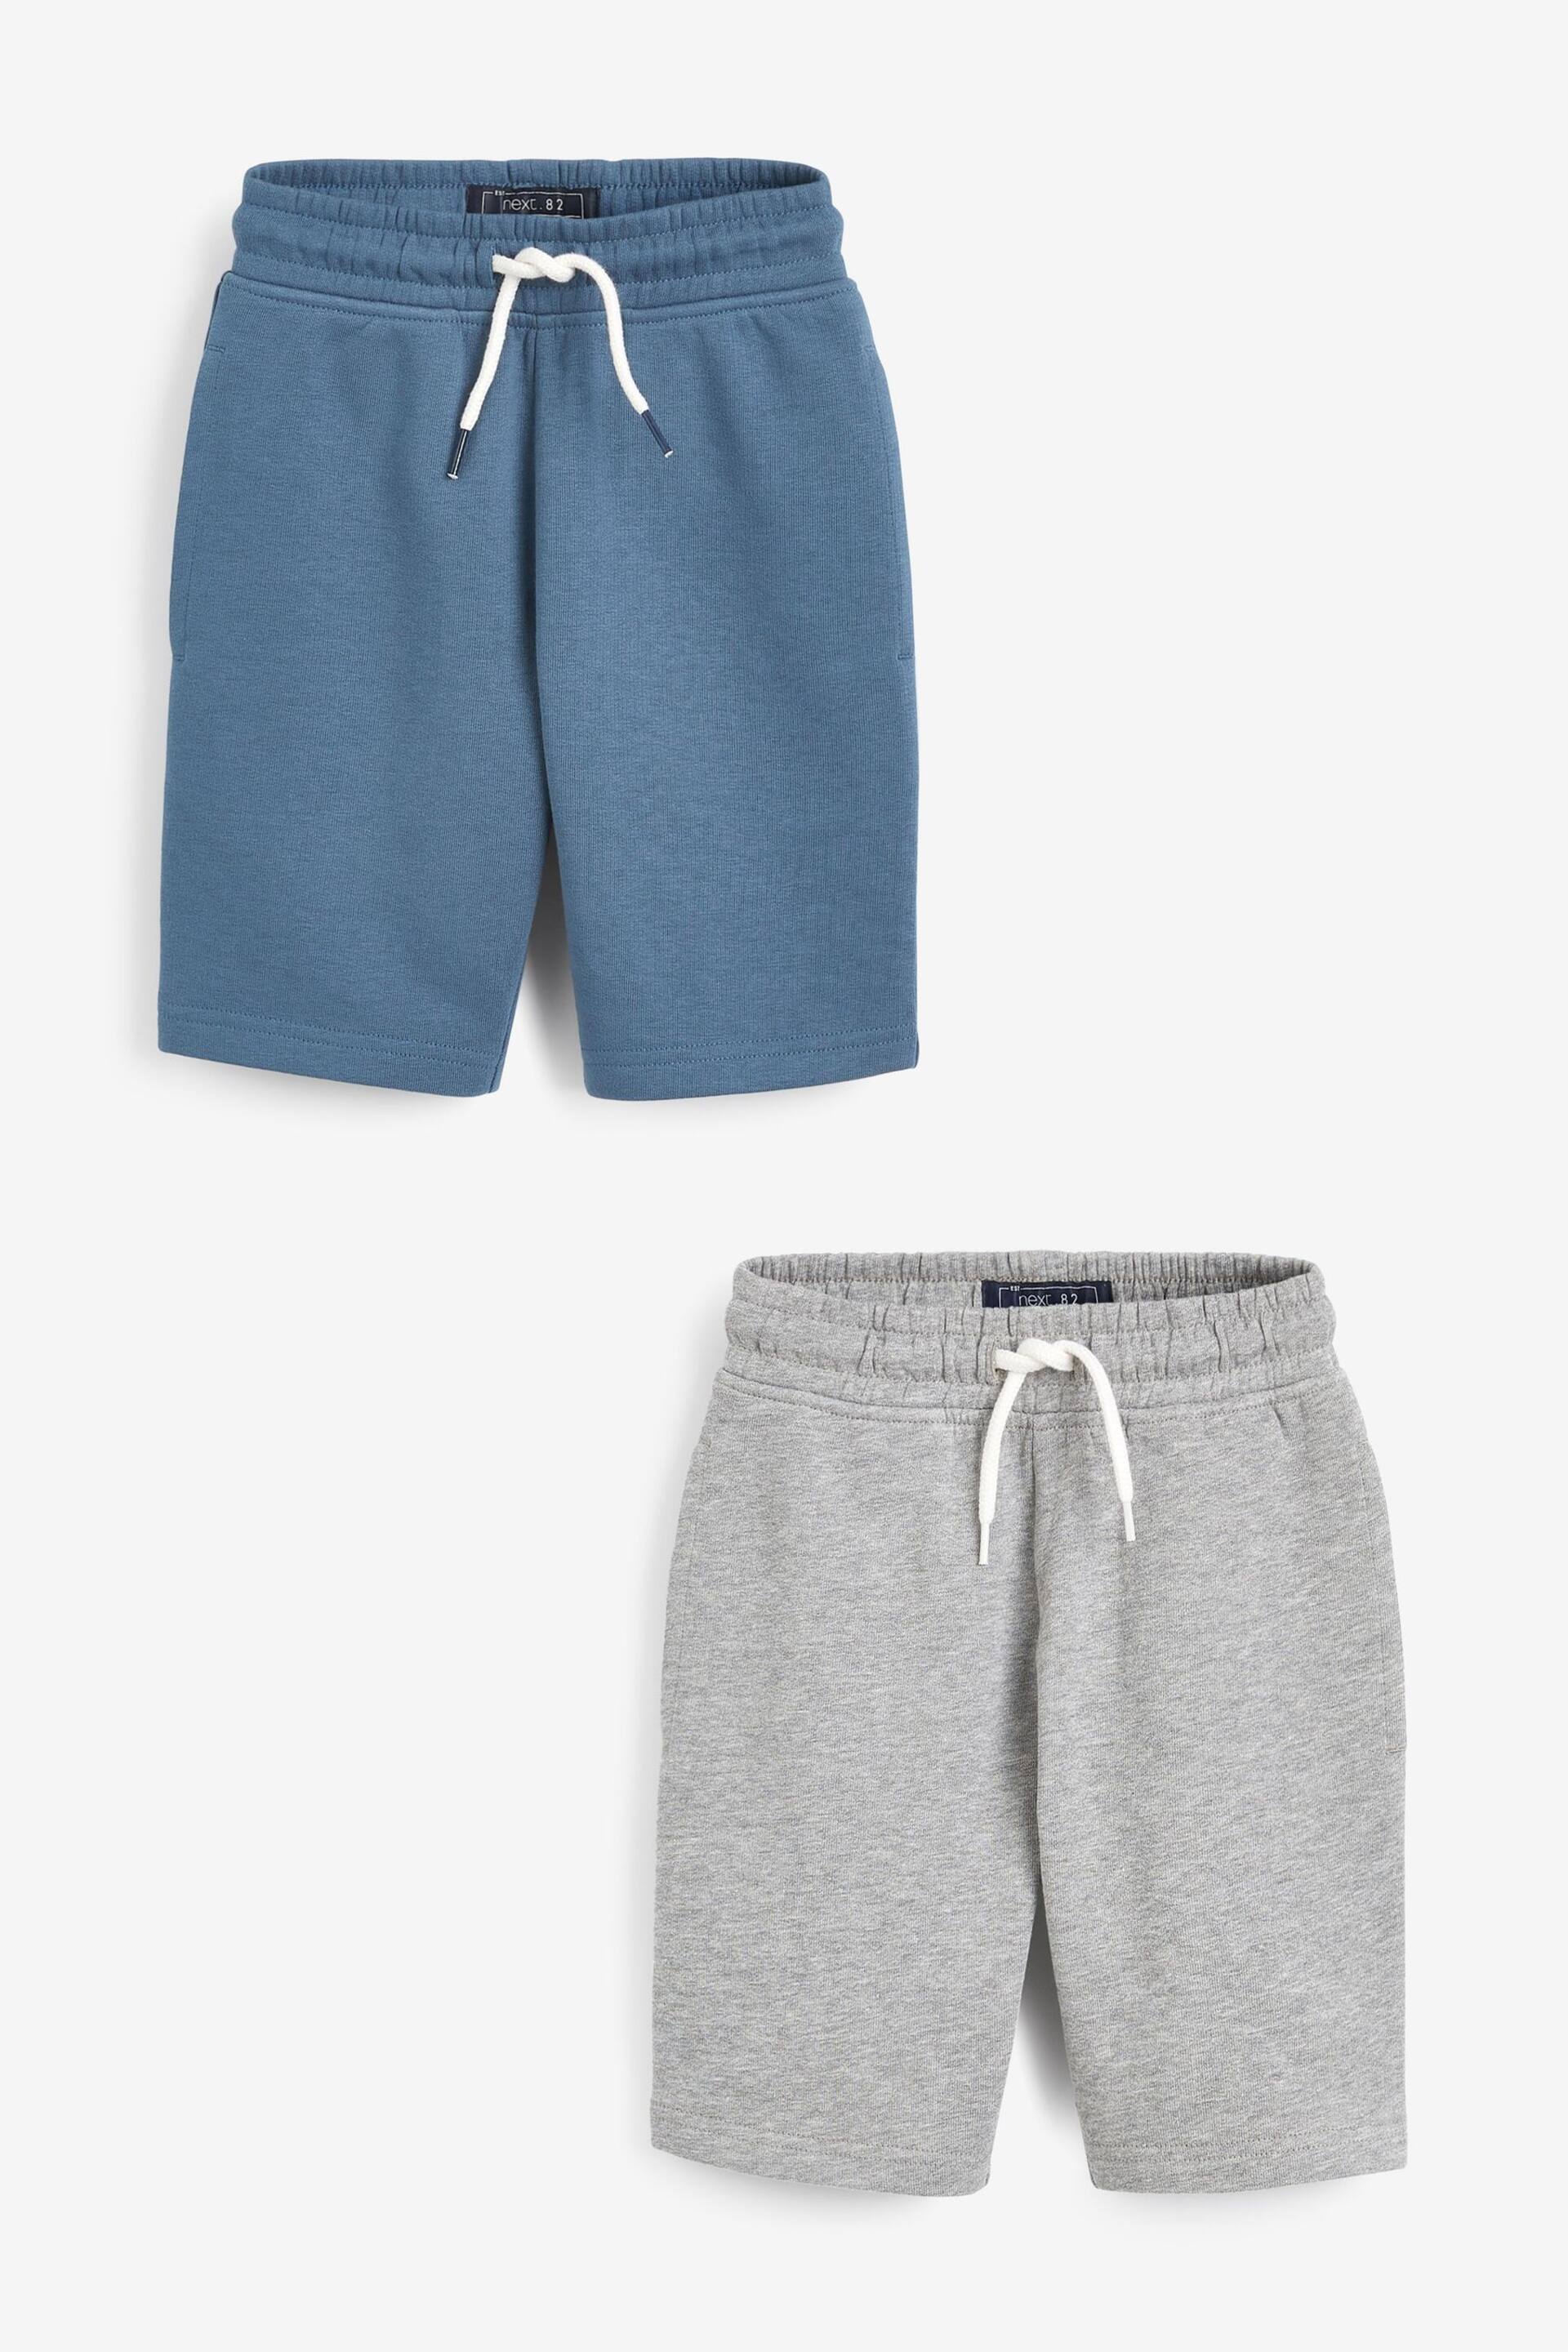 Blue/Grey 2 Pack Shorts (3-16yrs) - Image 1 of 5